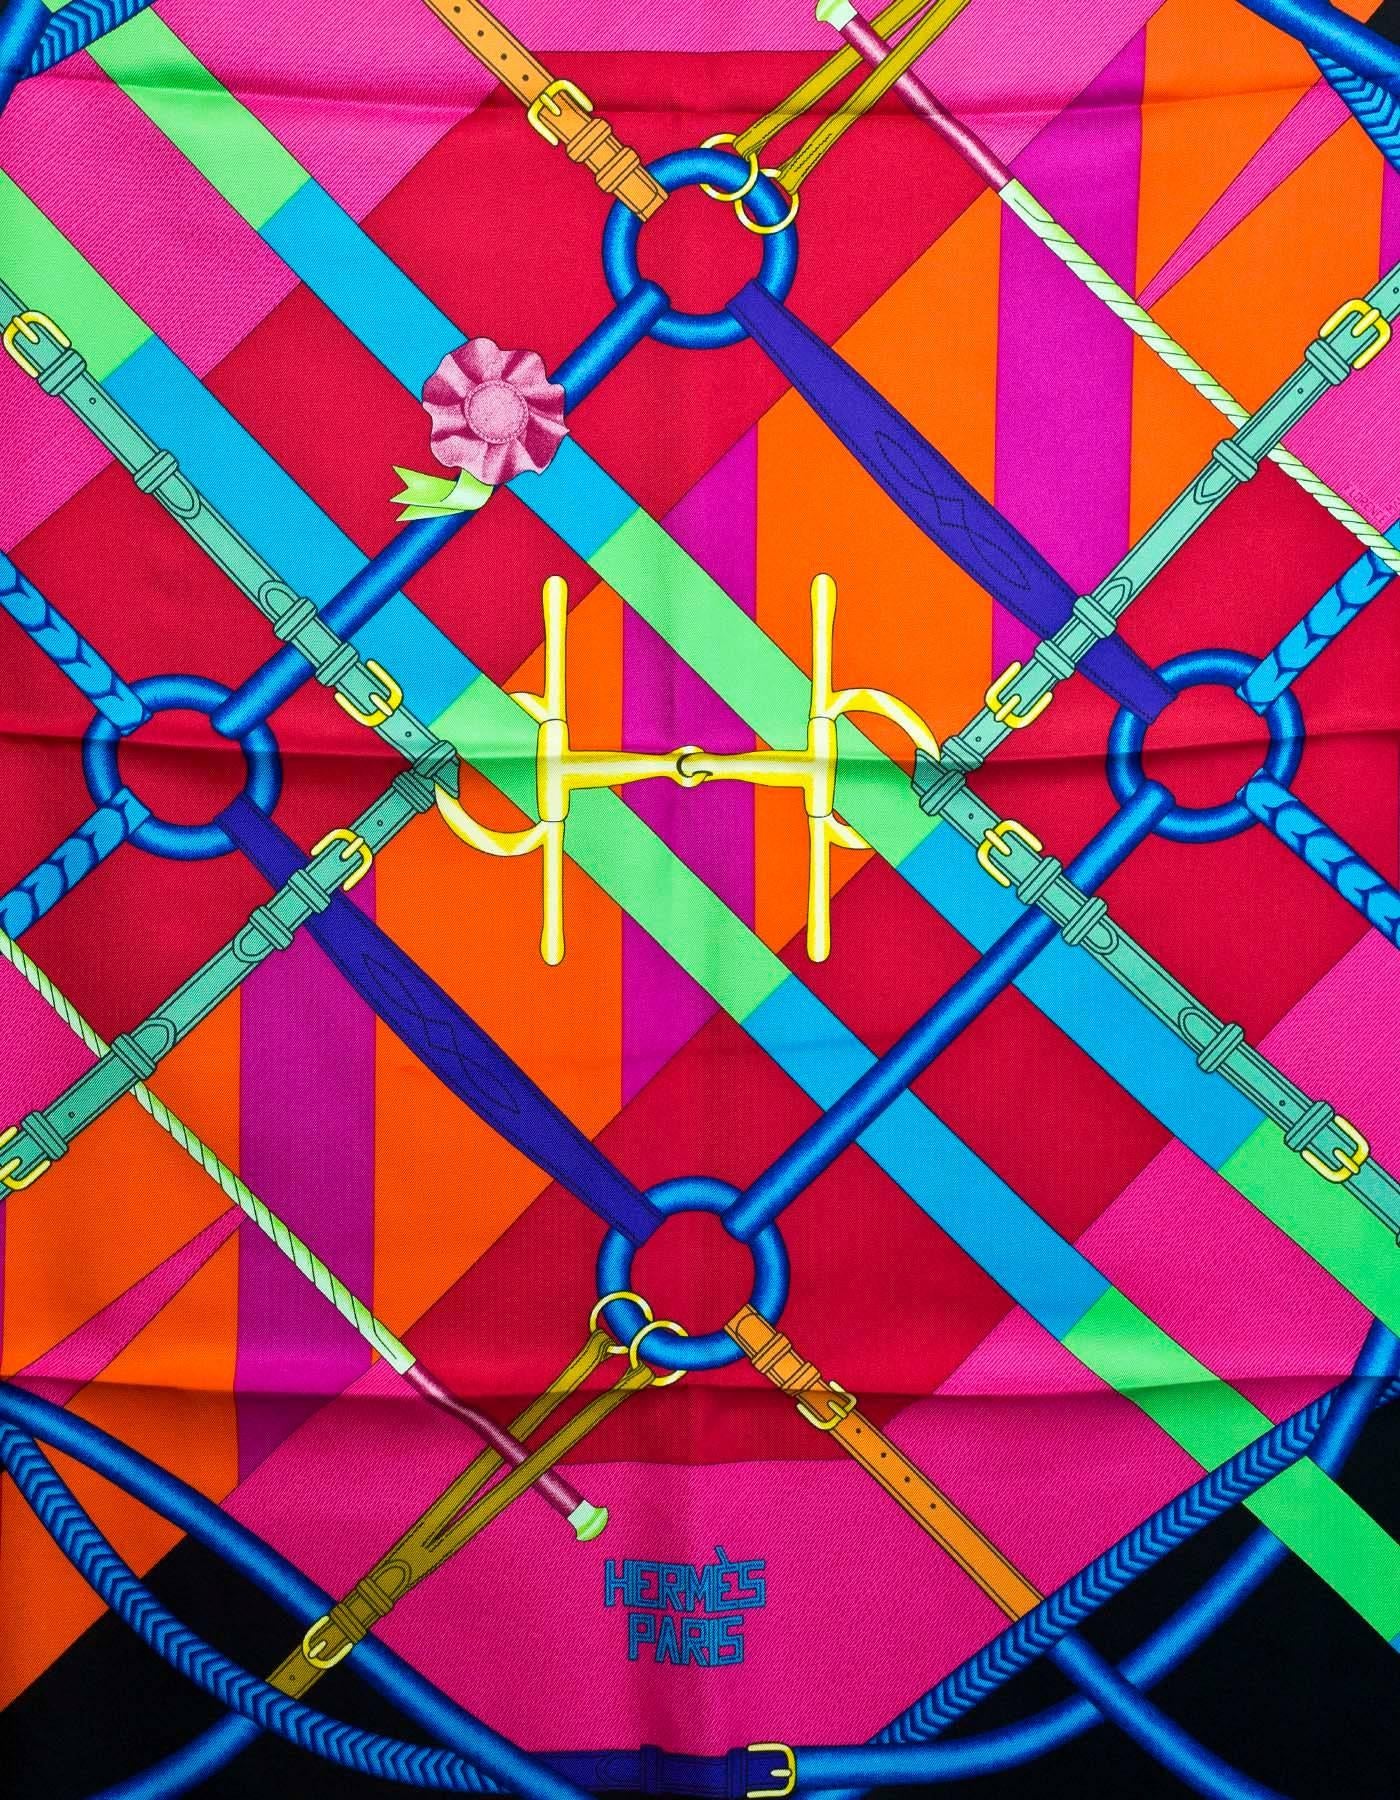 Hermes Parcours Sans Faute Silk 90cm Scarf

Made In: France
Color: Multi-colored noir/rose vif/vert
Composition: 100% Silk
Overall Condition: Excellent pre-owned condition
Included: Hermes box, sales receipt

Measurements:
Length: 35"
Width: